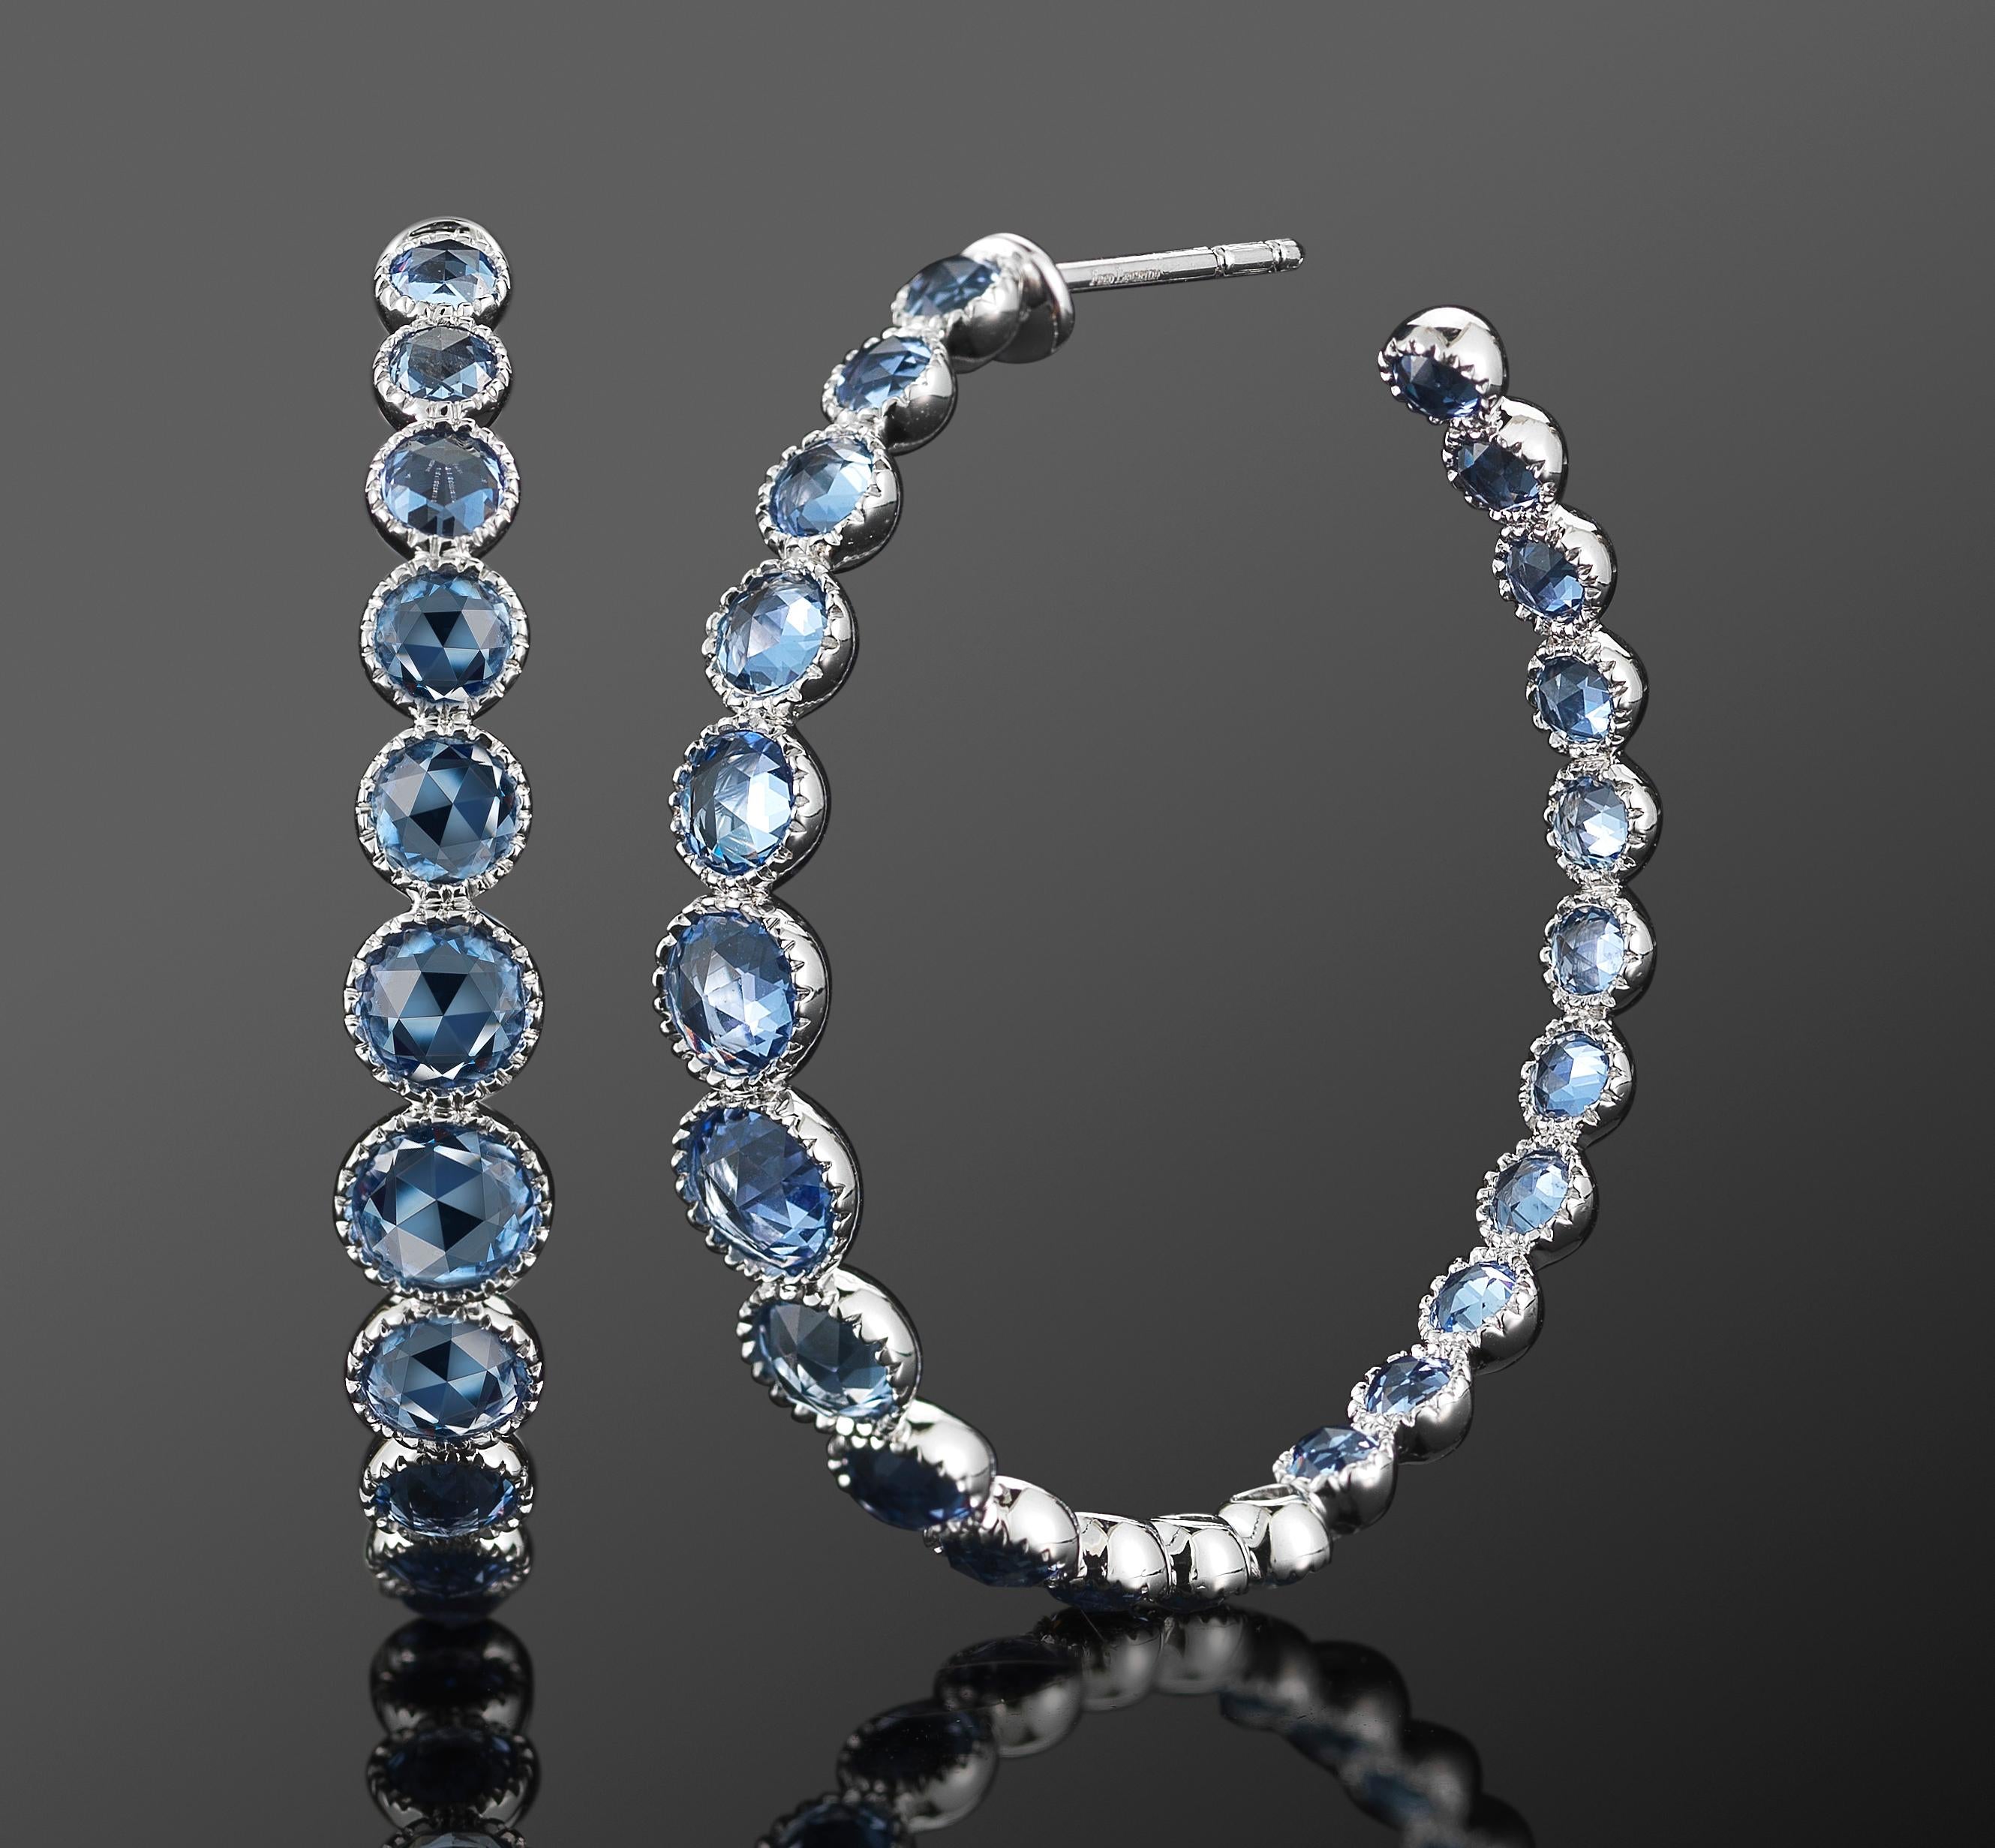 Graduating hoops of round rose cut sapphires totaling approximately 6.79 carats are mounted in 18 karat white gold.

Fred Leighton is renowned for extraordinary collections of vintage and contemporary jewelry. New signature creations combine the